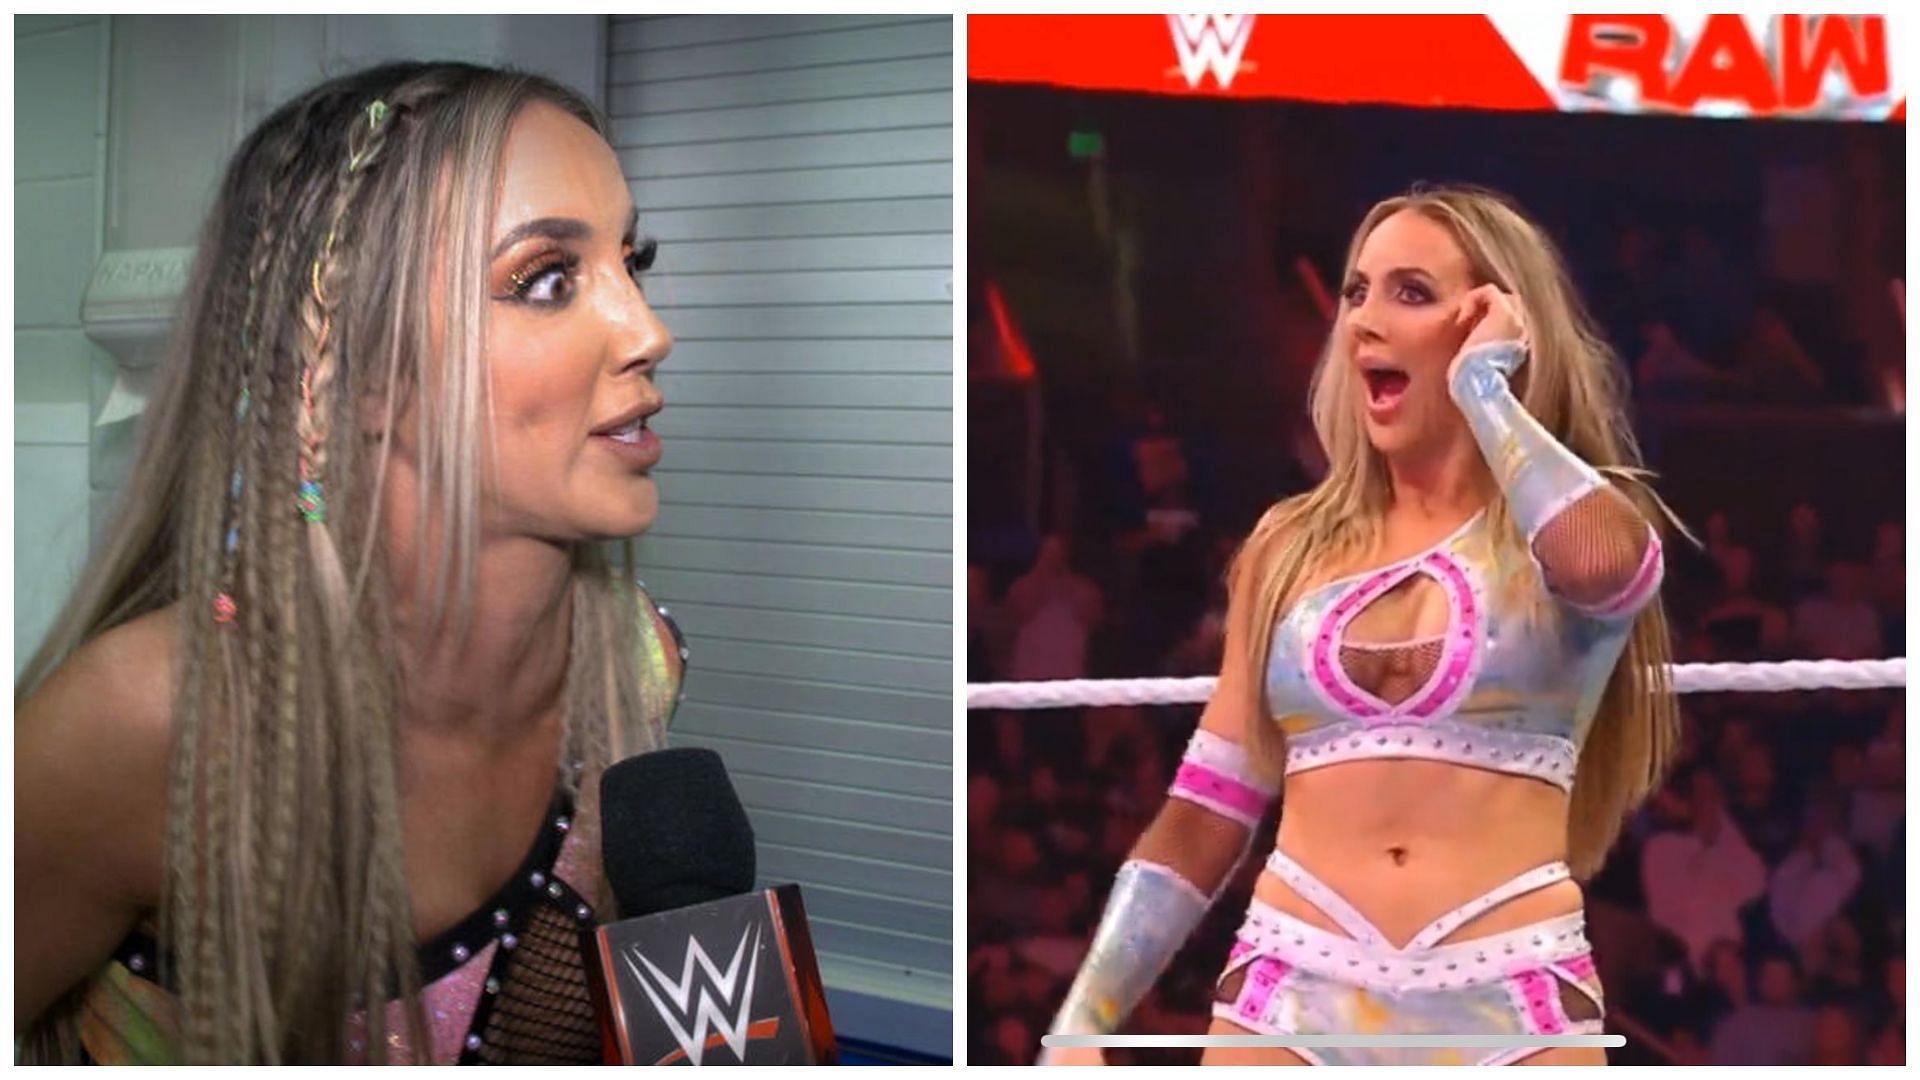 Chelsea Green is a WWE RAW brand superstar.